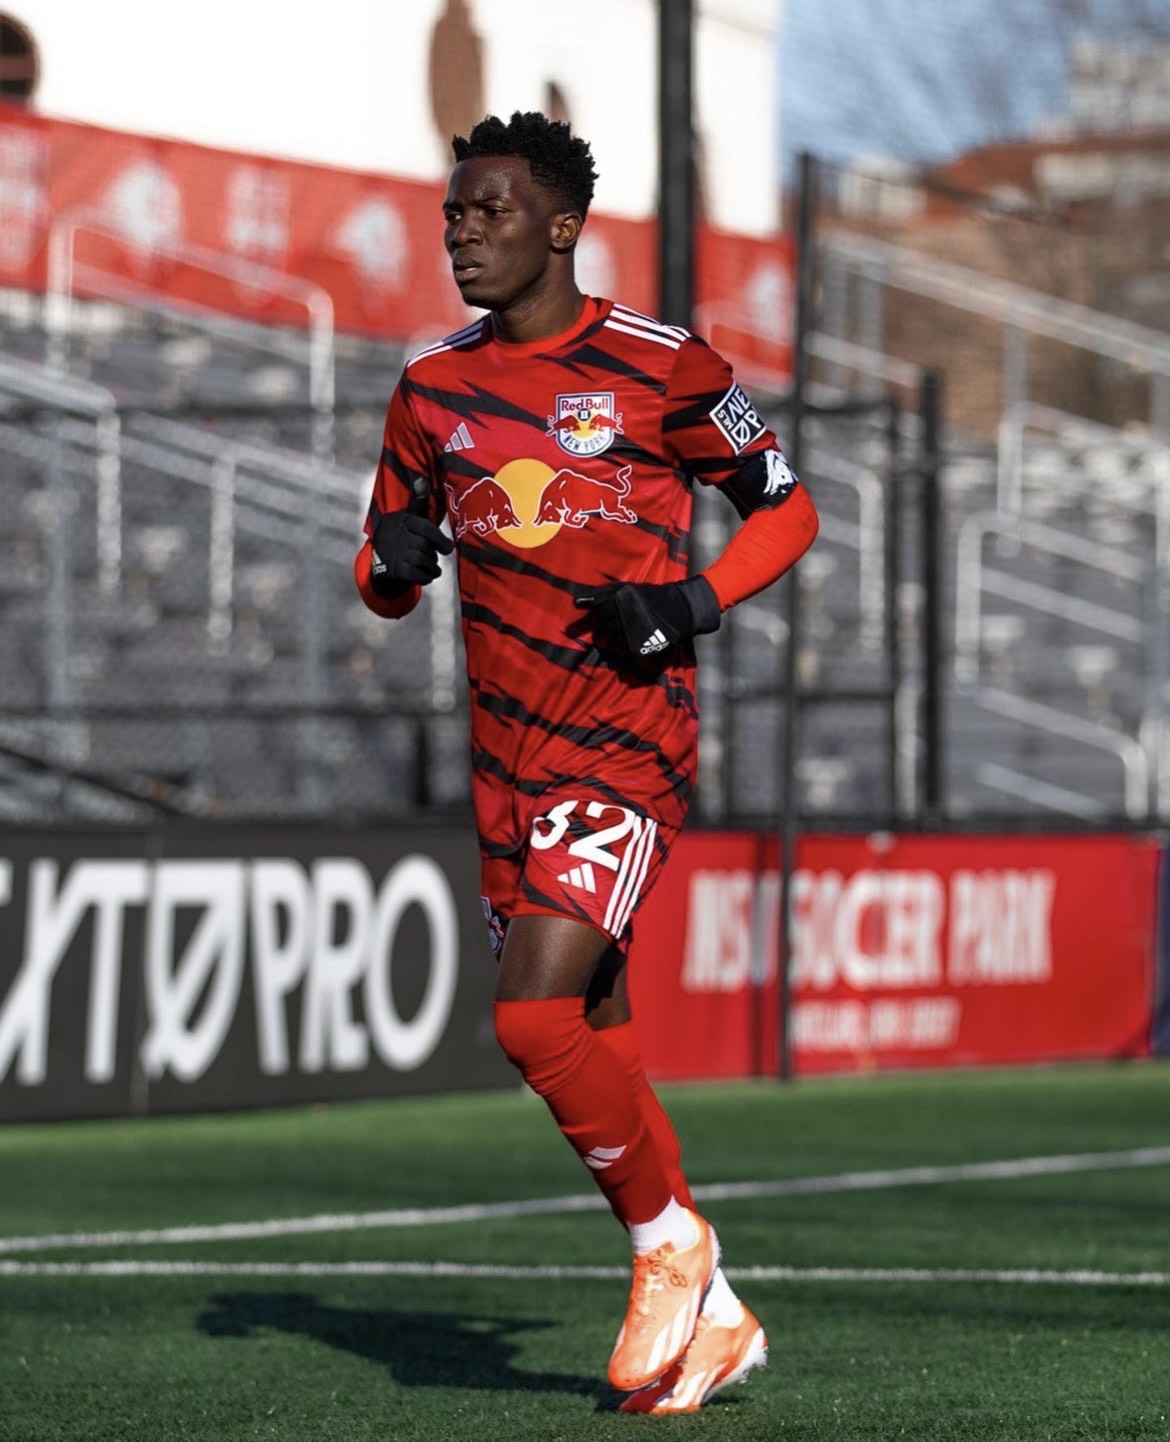 Kasule Ibrahim Jr scored two goals in the match. Photo courtesy of New York Red Bulls